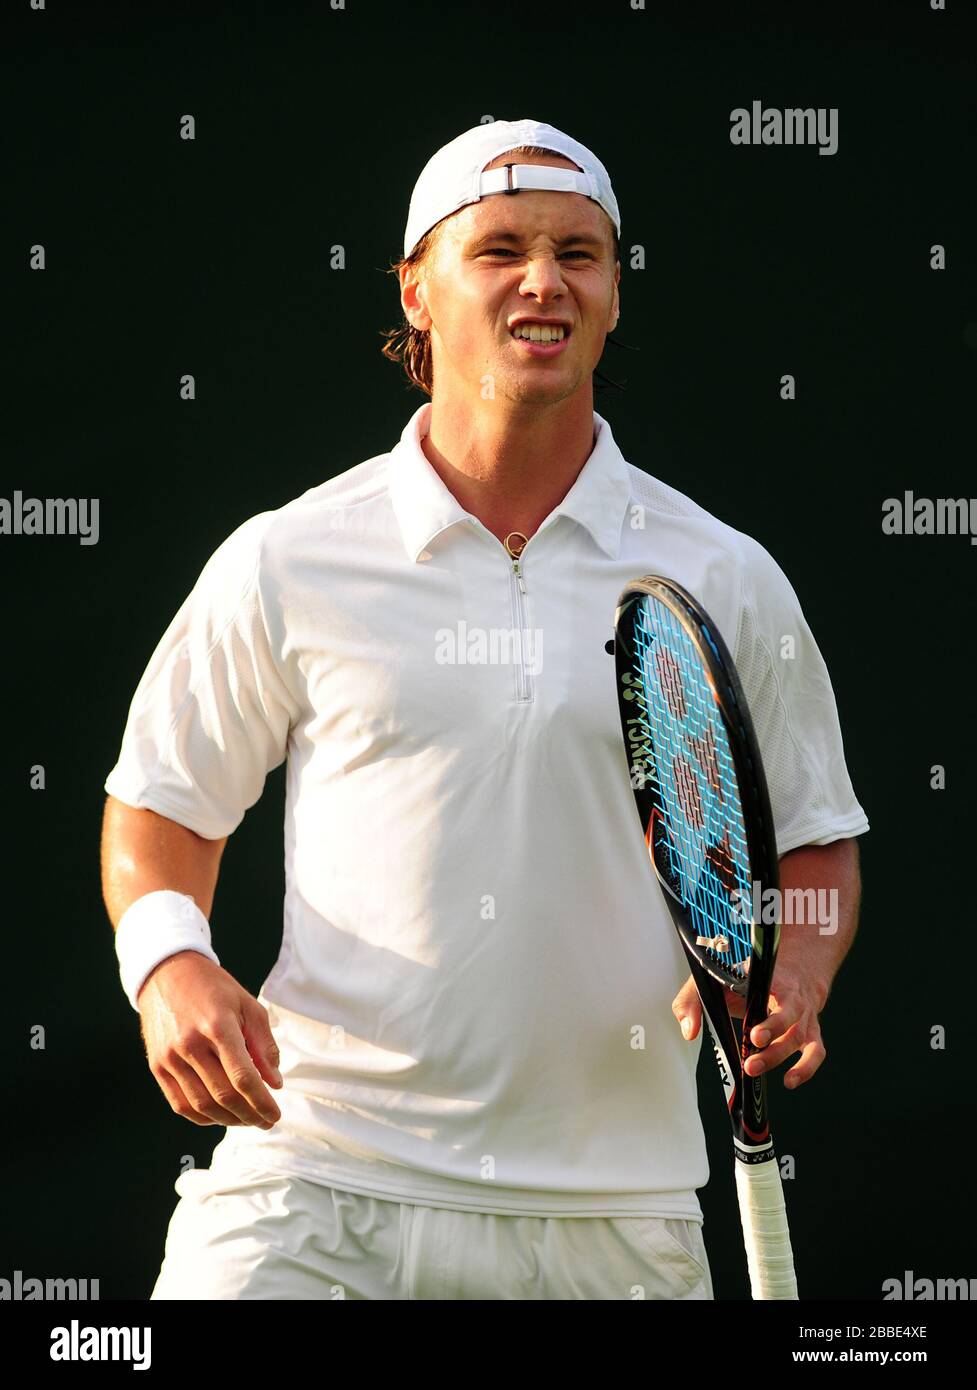 Lithuania's Ricardas Berankis reacts in his match against France's Paul-Henri Mathieu Stock Photo